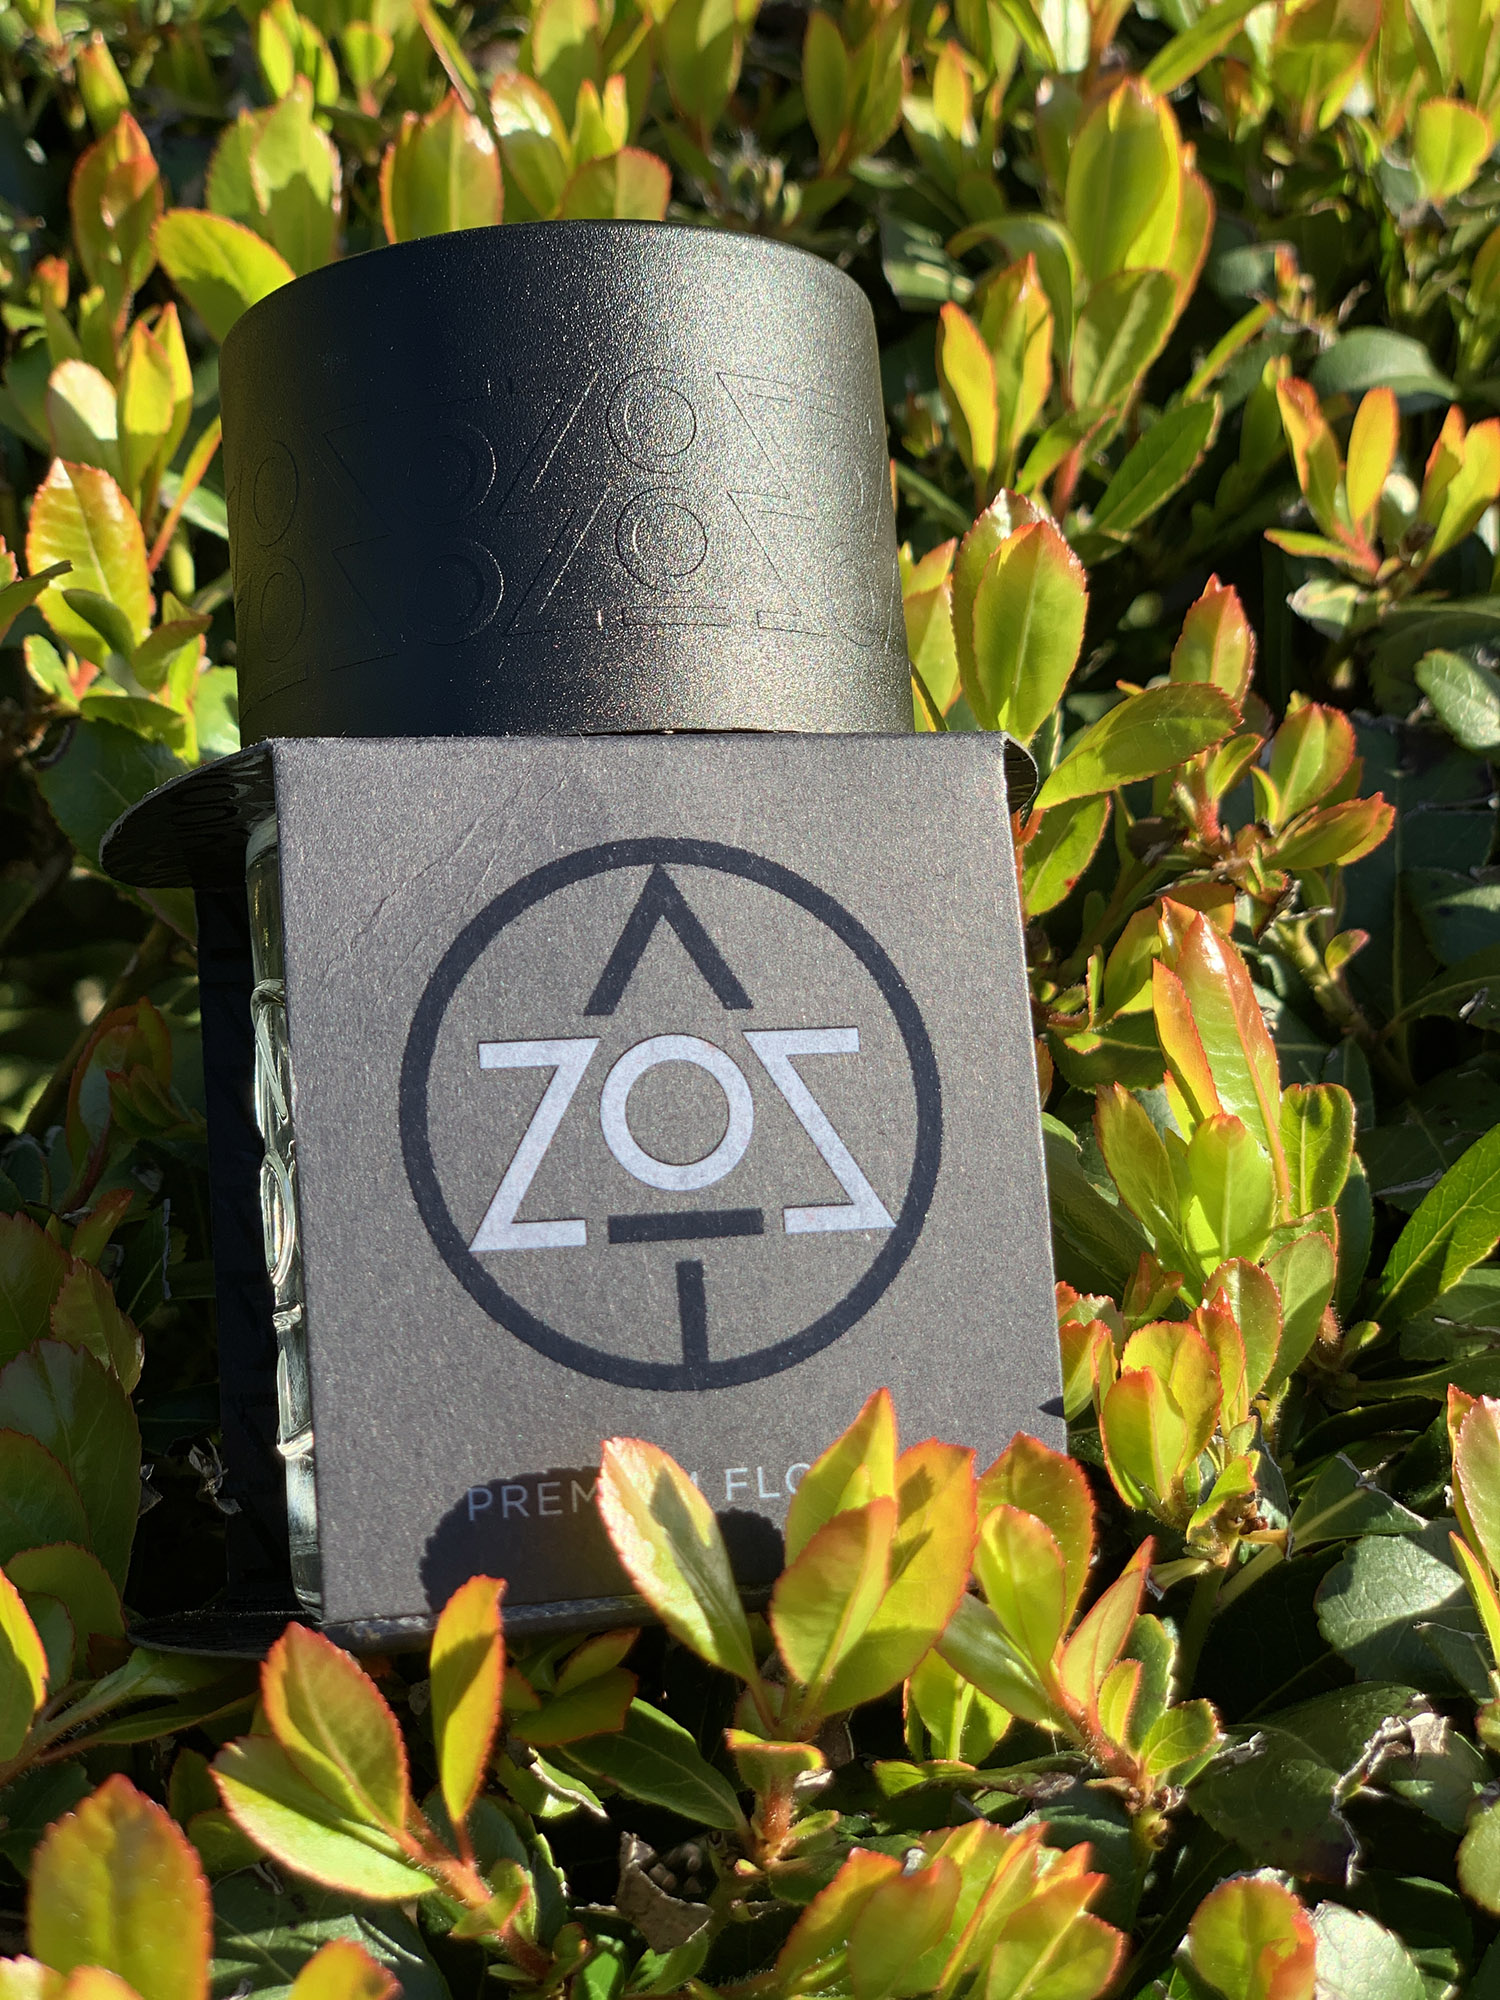 ZoZ Cannabis incorporates thoughtful packing into their strategy.